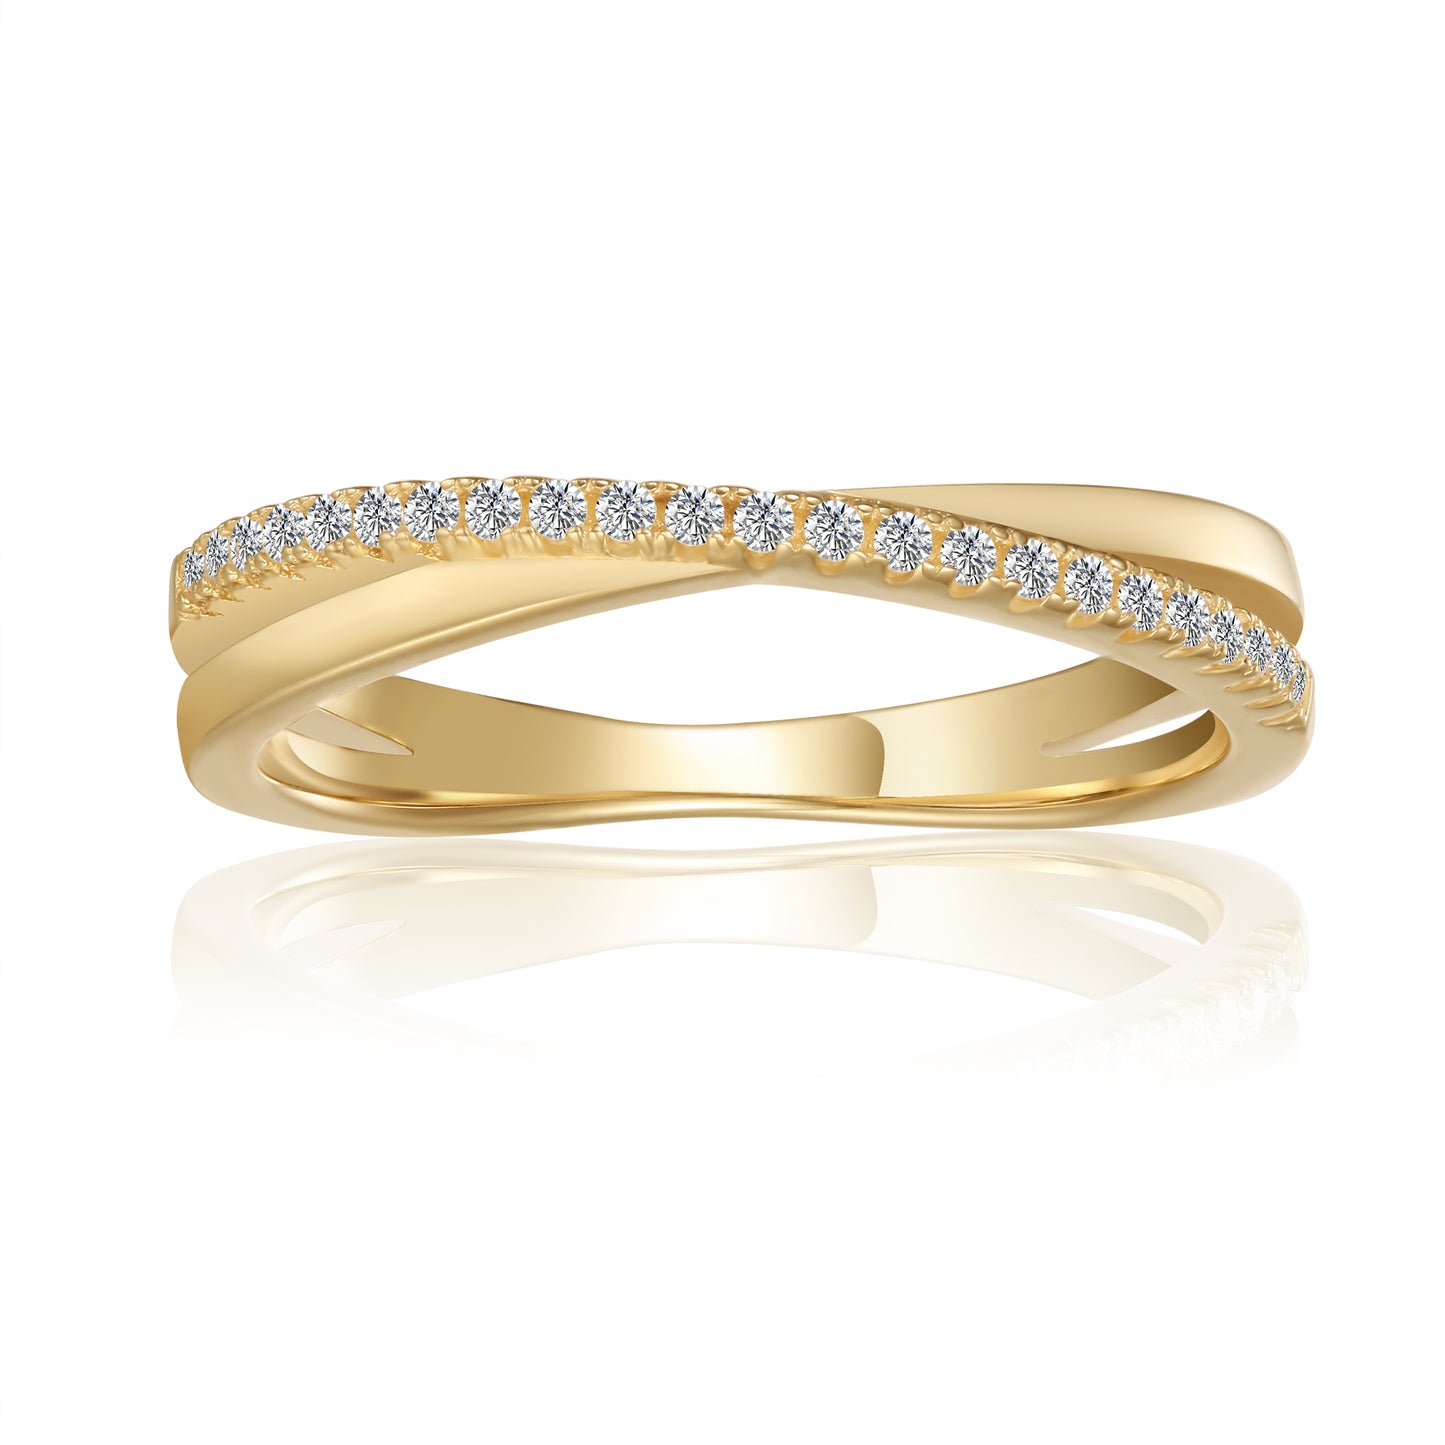 Infinity Moissanite Wedding Band Set in 9ct Yellow Gold